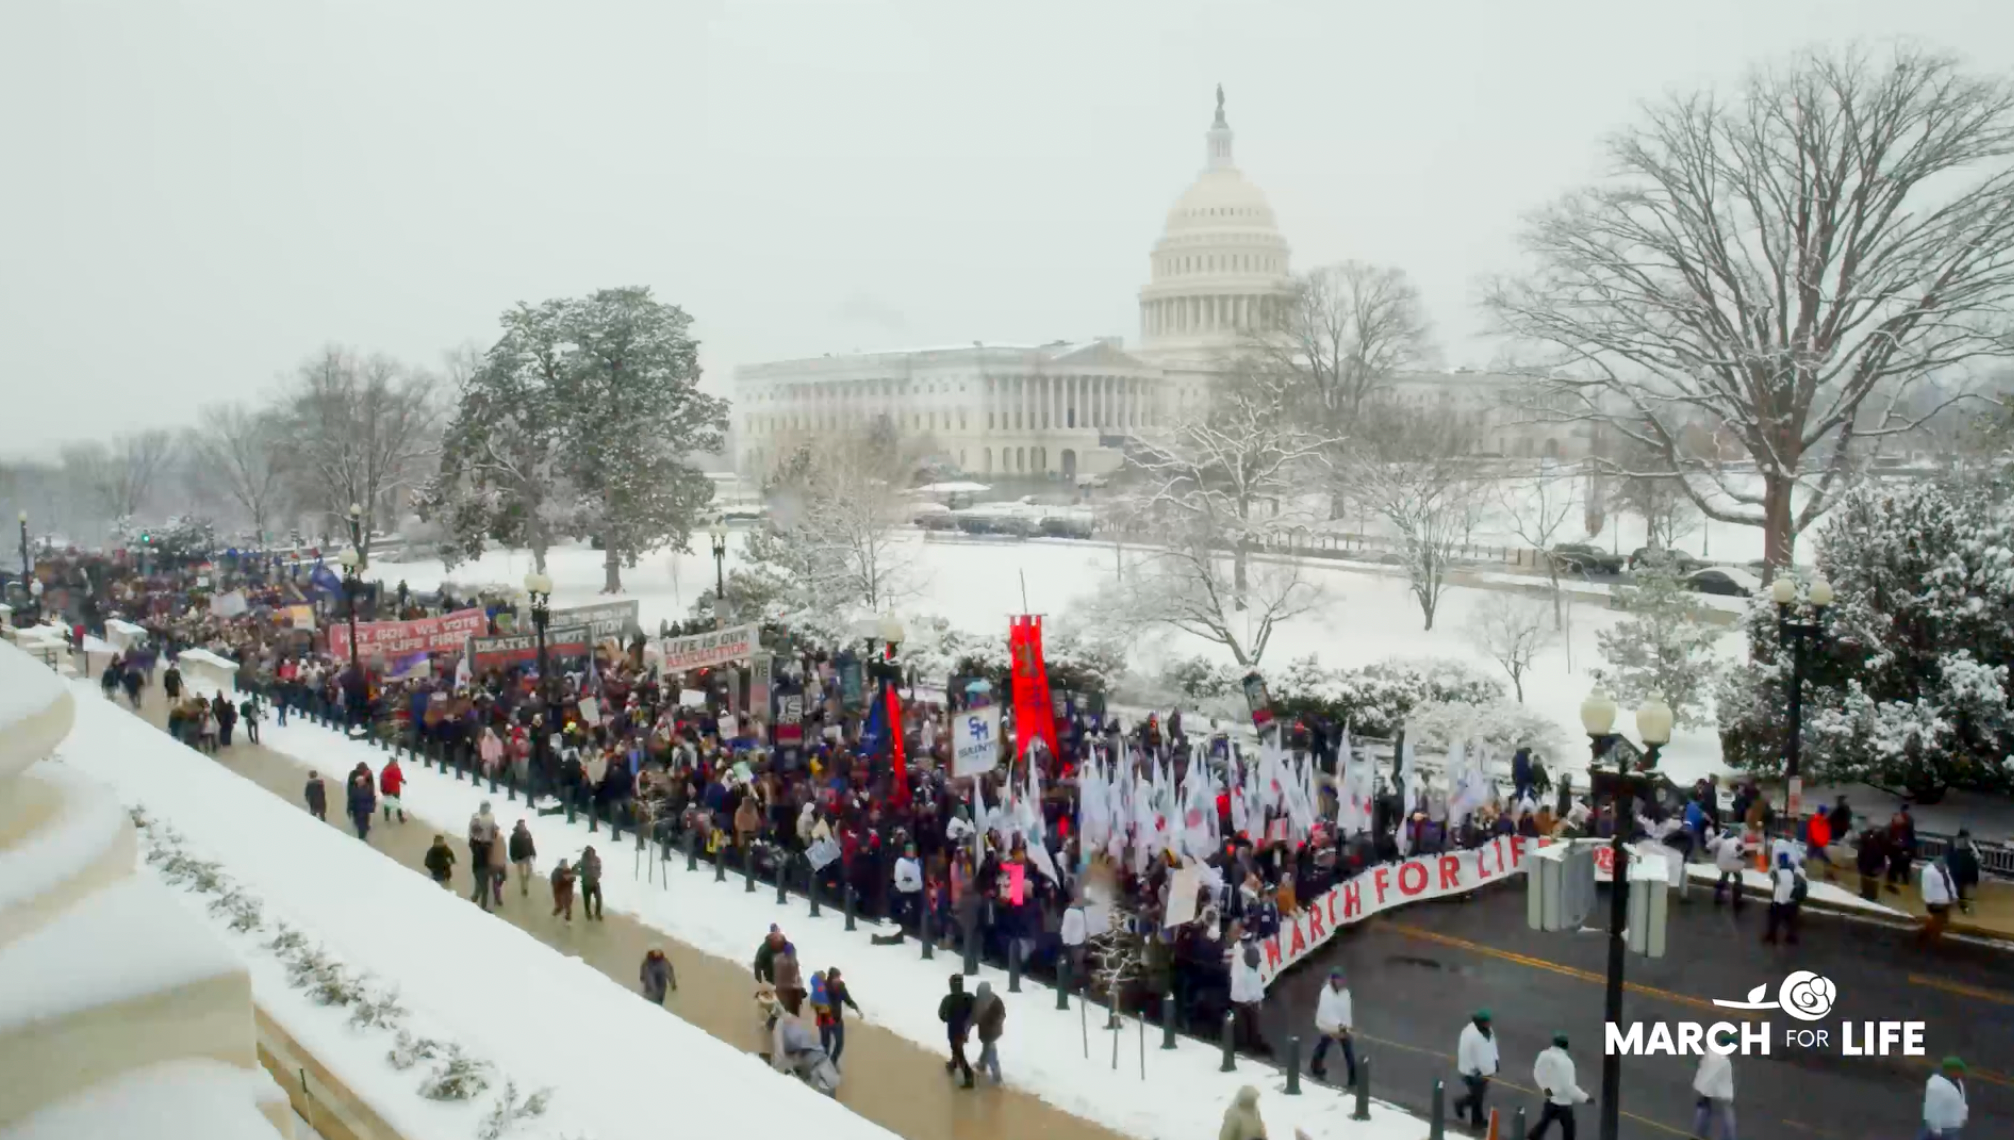 51st March for Life an opportunity to ‘refocus’ pro-life efforts